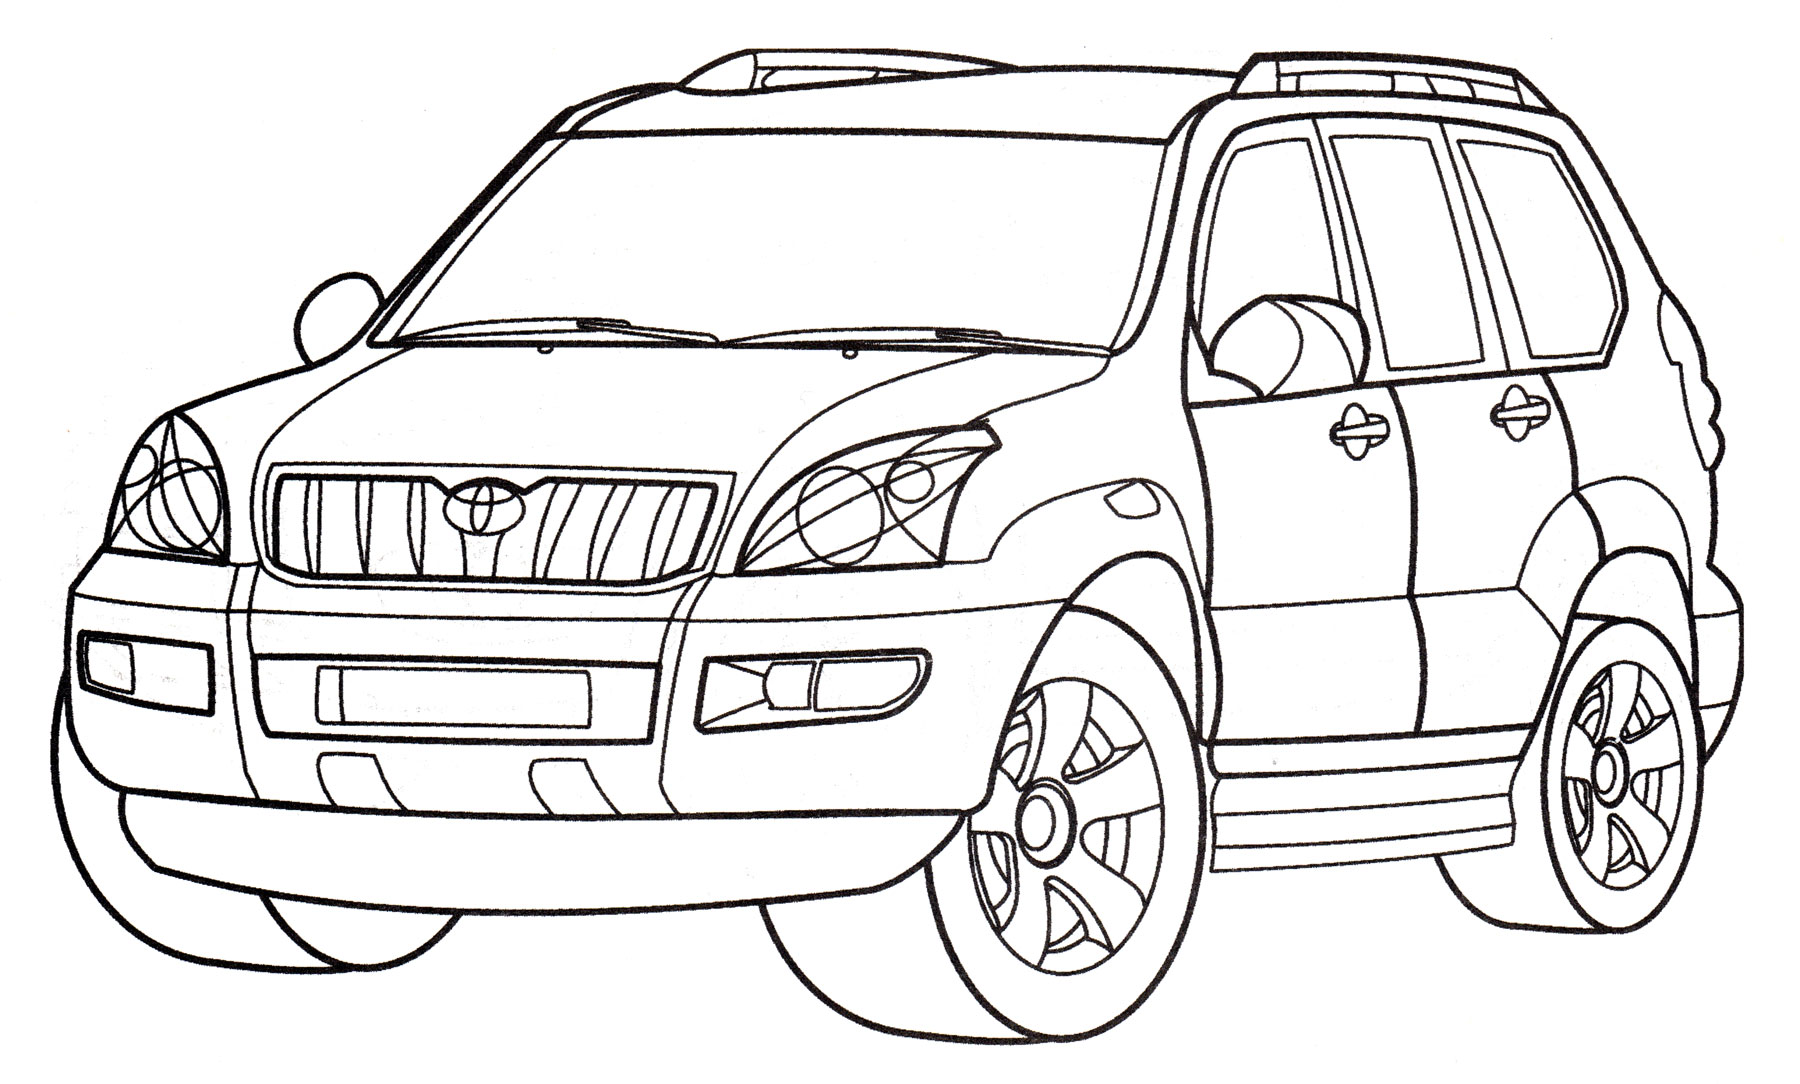 Toyota Coloring Pages to download and print for free